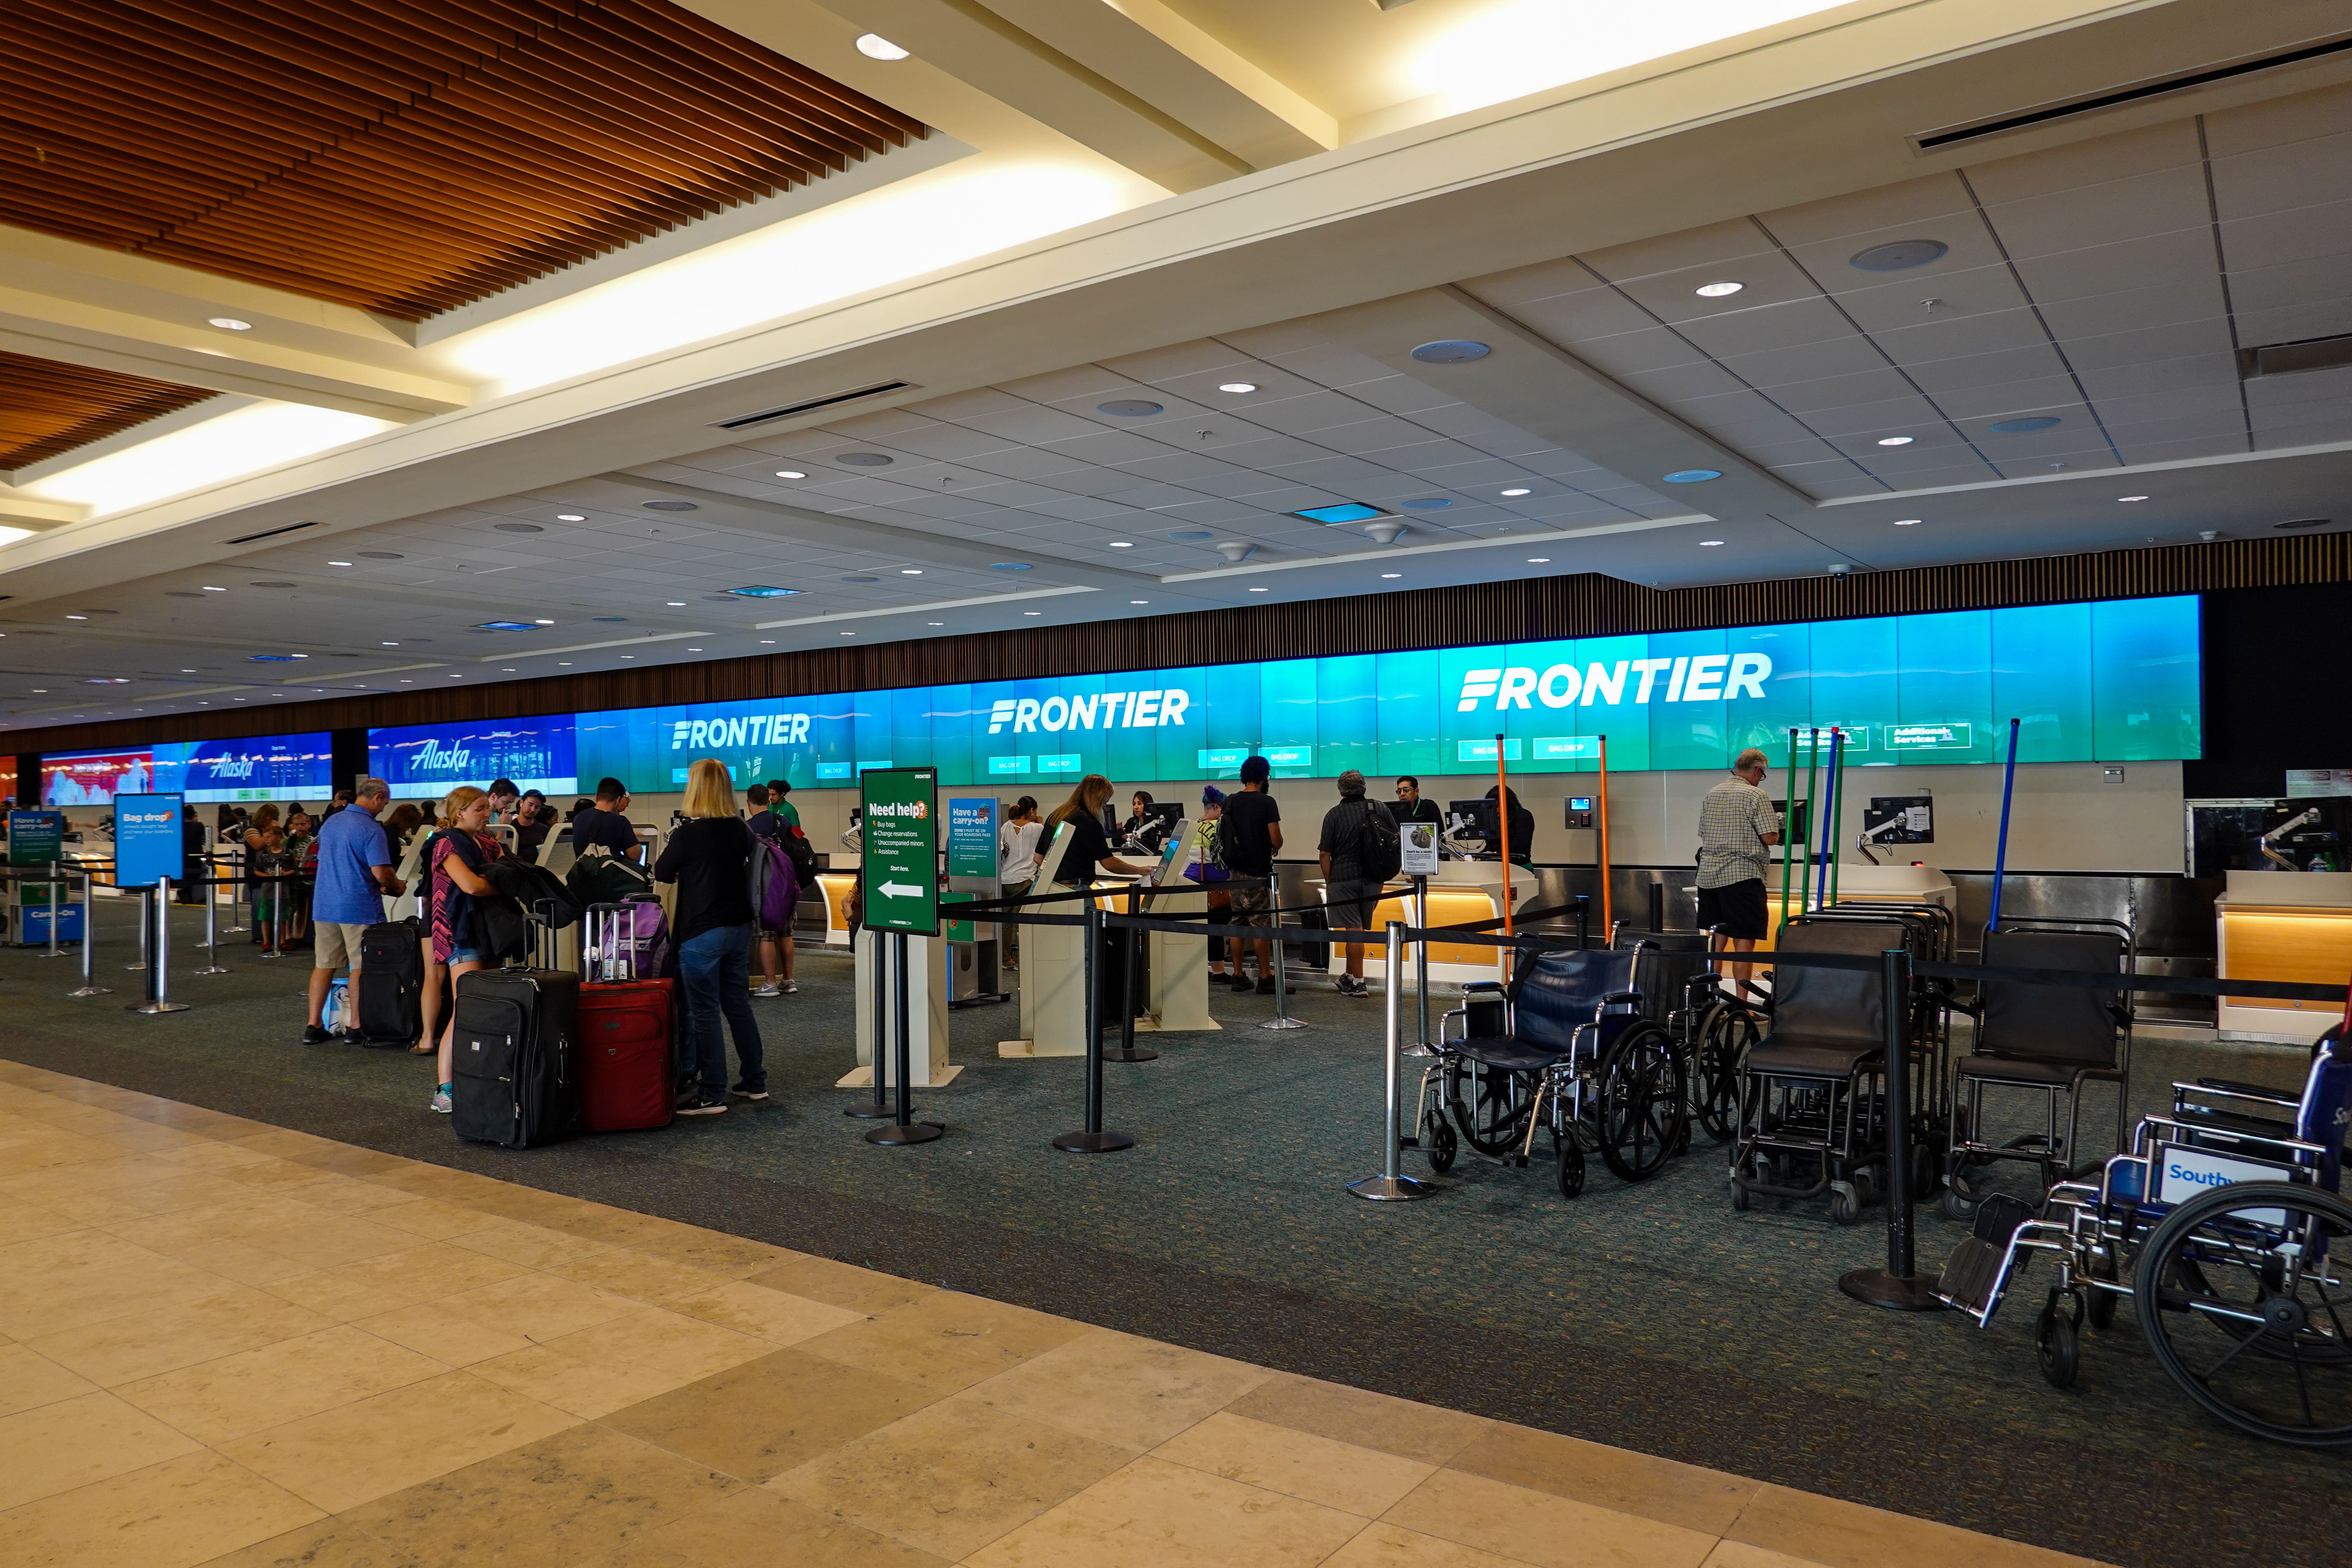 Many passengers checking in for Frontier Airlines flights at the check in counter.